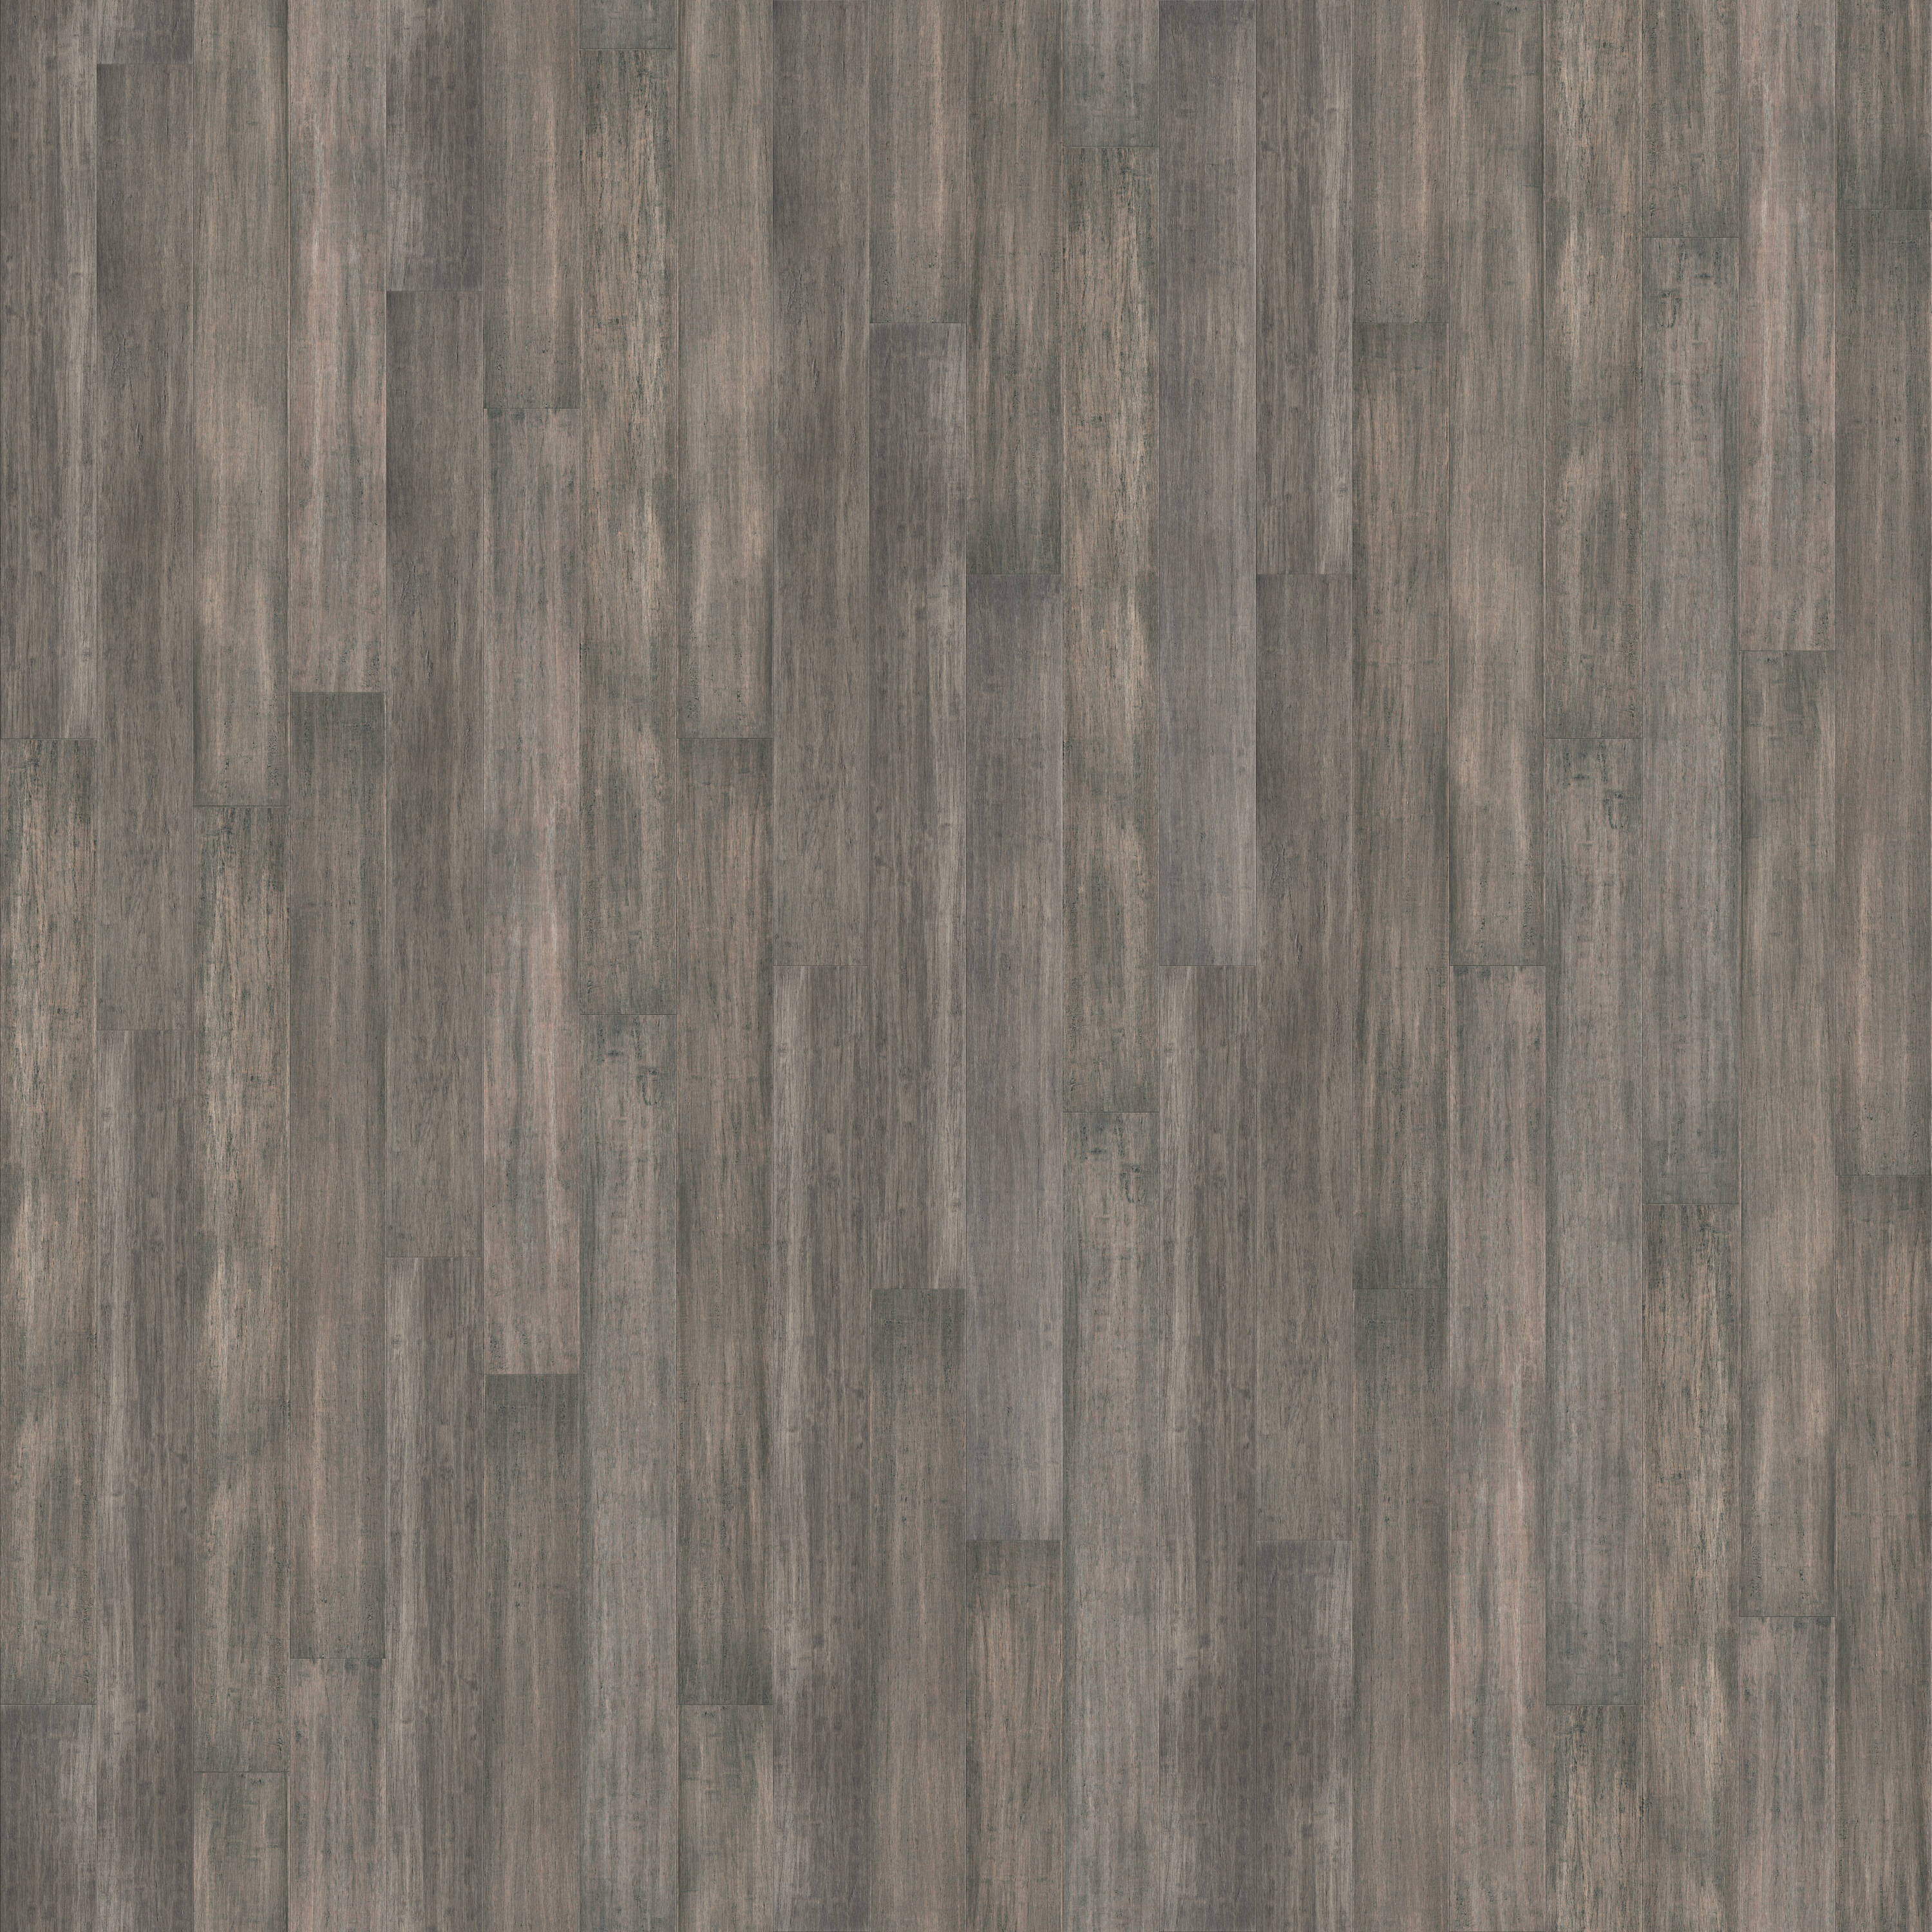 Fossilized Boardwalk Bamboo 5-5/16-in W x 9/16-in T x Distressed Engineered Hardwood Flooring (21.5-sq ft) in Gray | - CALI 7014009200